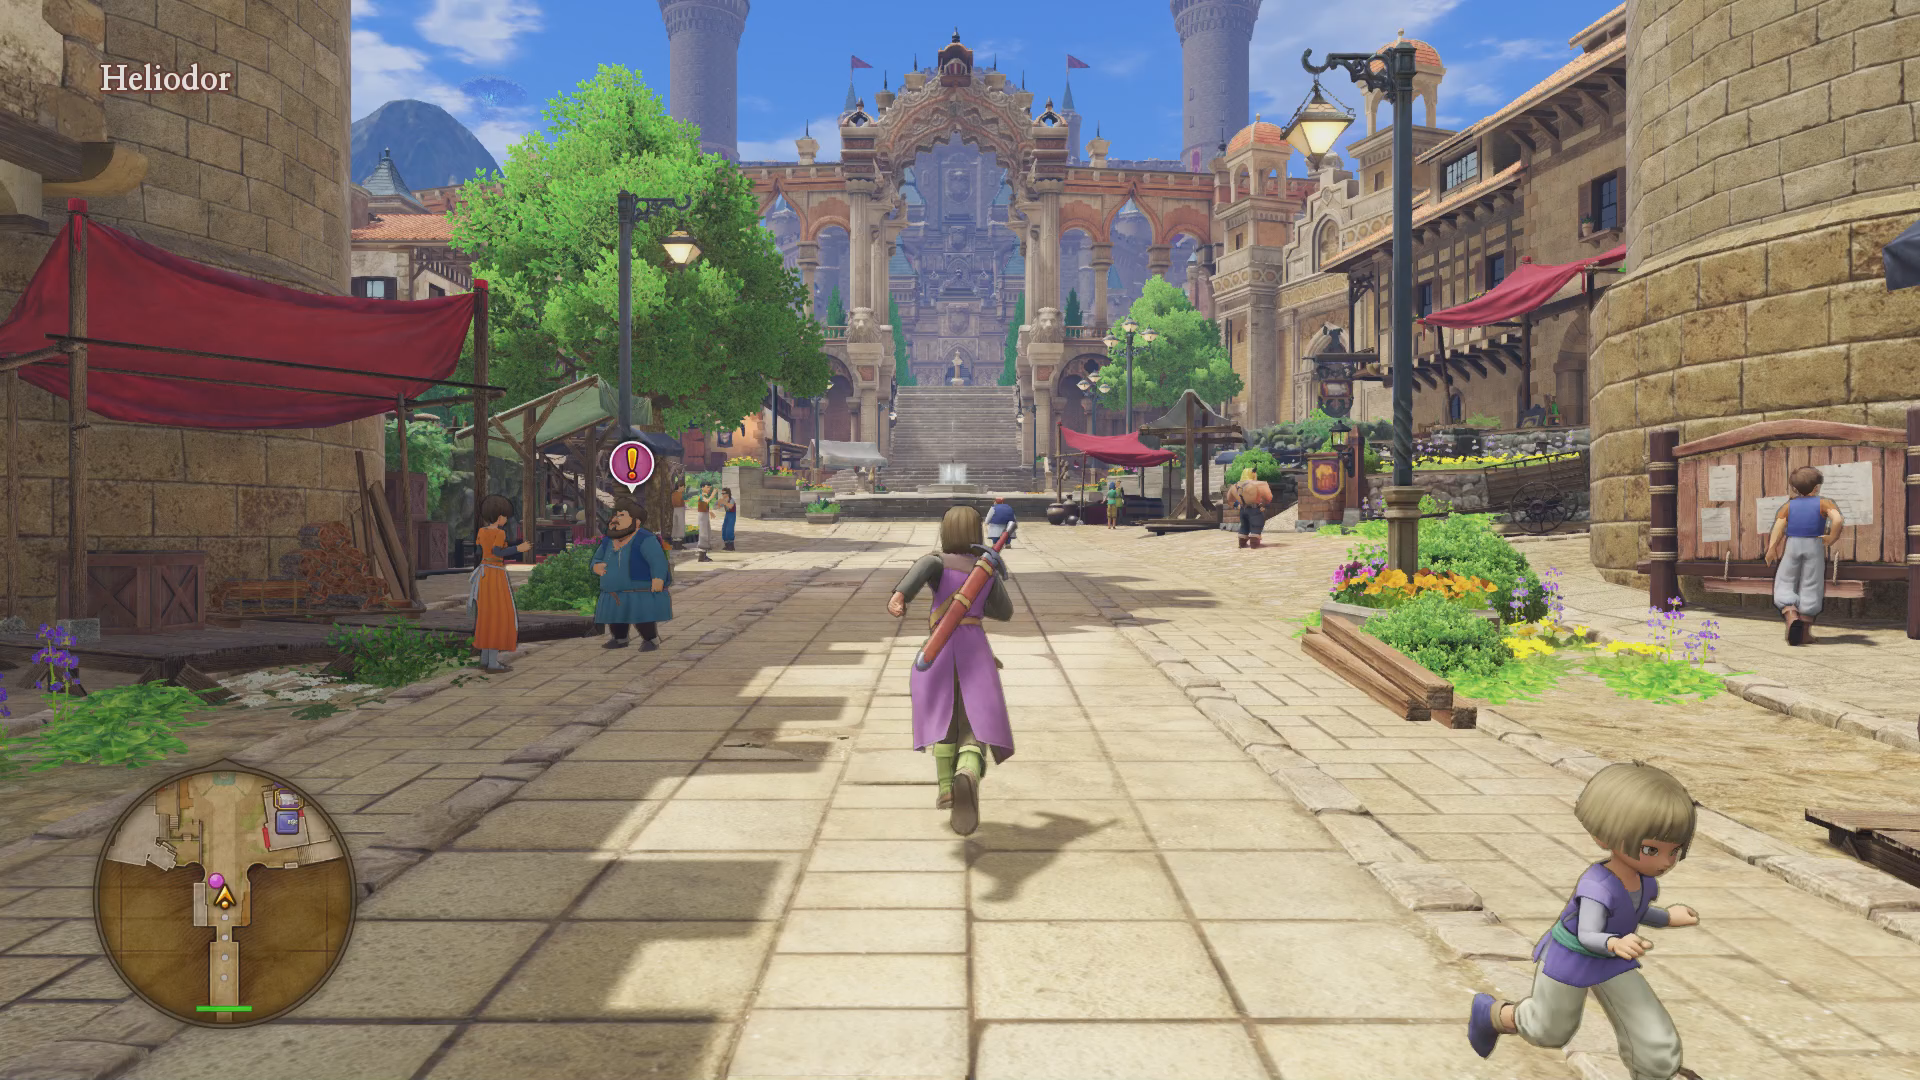 Dragon Quest XI S: Echoes of an elusive age - Definitive Edition. Dragon Quest 11 s. Dragon Quest 11: Echoes of an elusive age. Dragon Quest XI S: Definitive Edition.